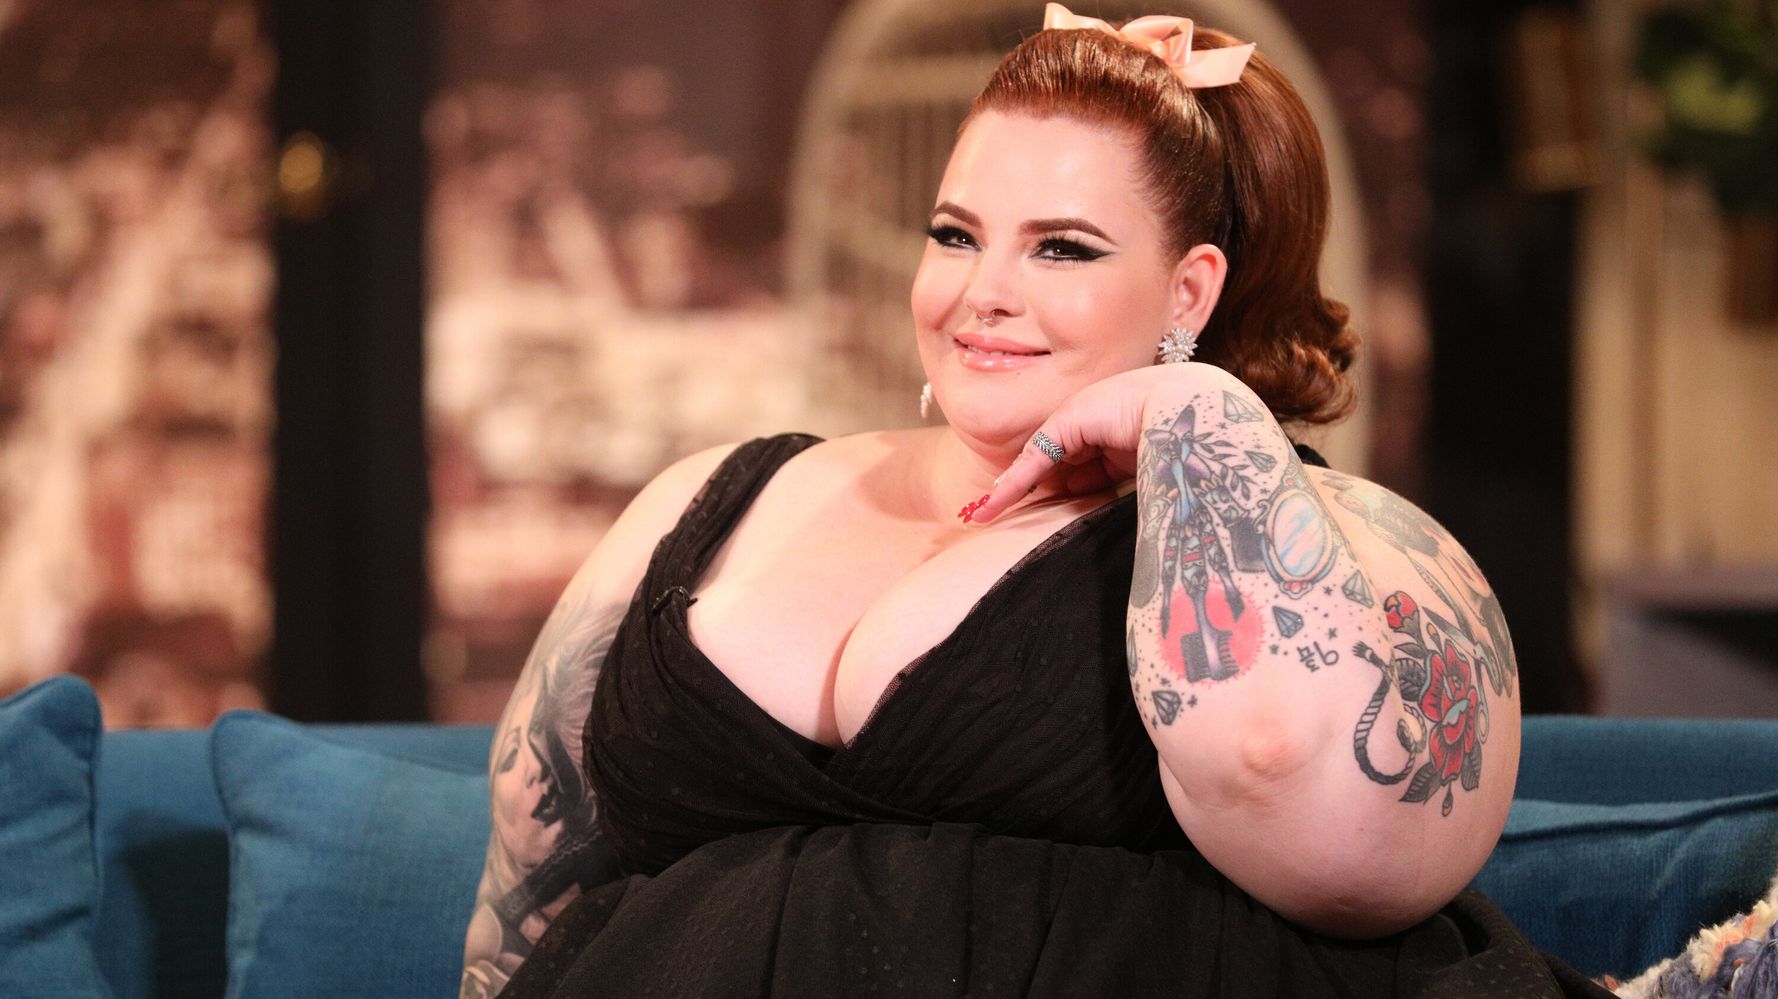 1778px x 999px - Like Tess Holliday, I'm Fat And I Just Want To Live My Damn Life | HuffPost  HuffPost Personal